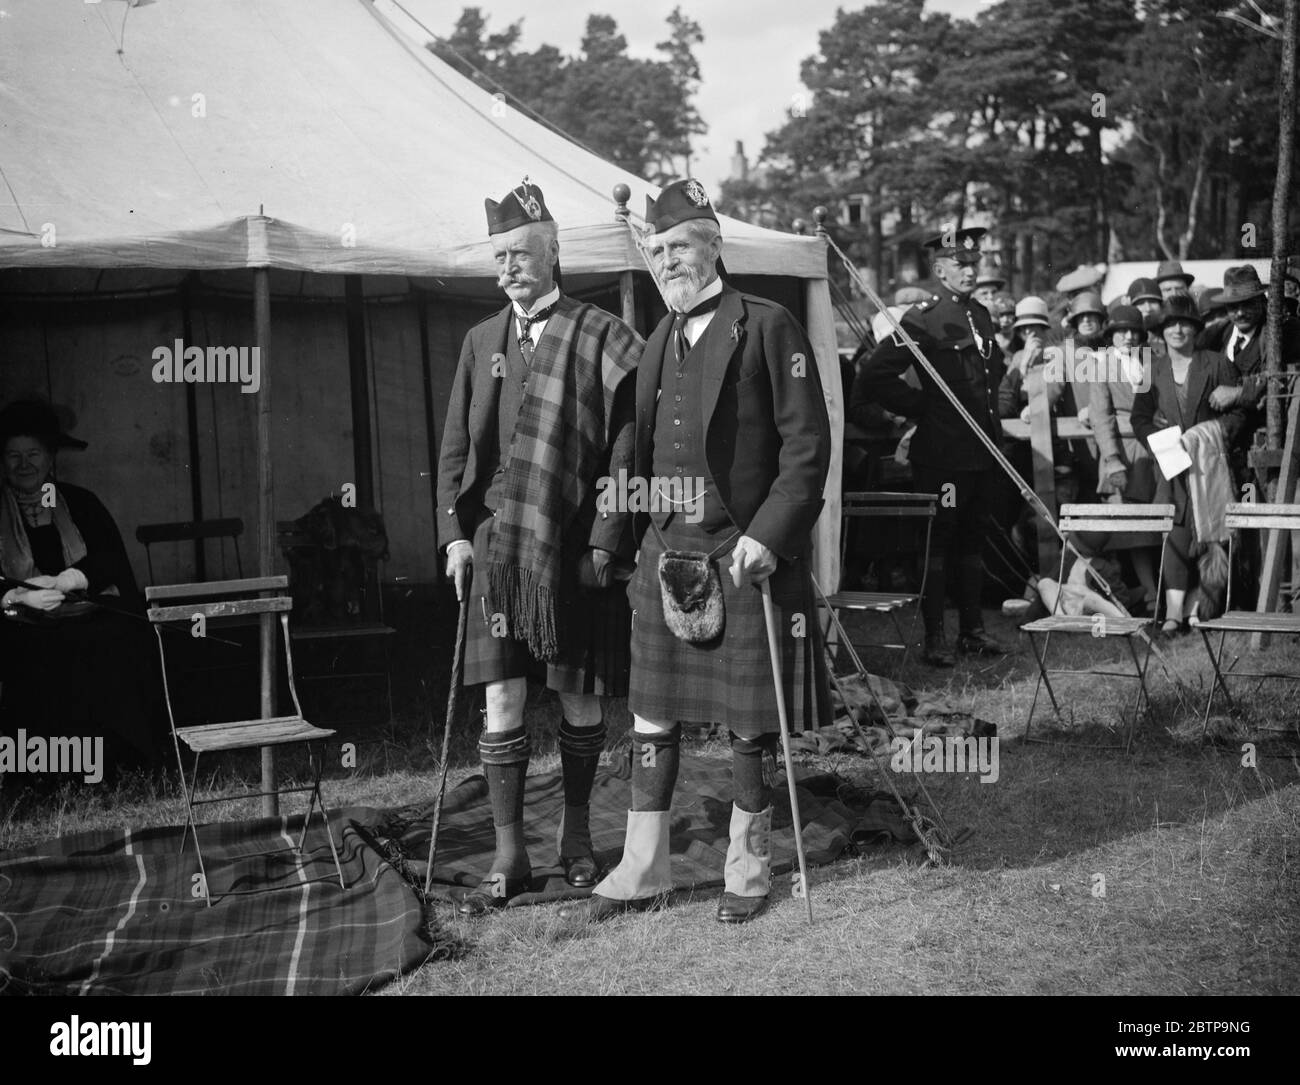 Aboyne highland games . Lord Aberdeen and the Marquis of Huntley . 9 September 1926 Stock Photo